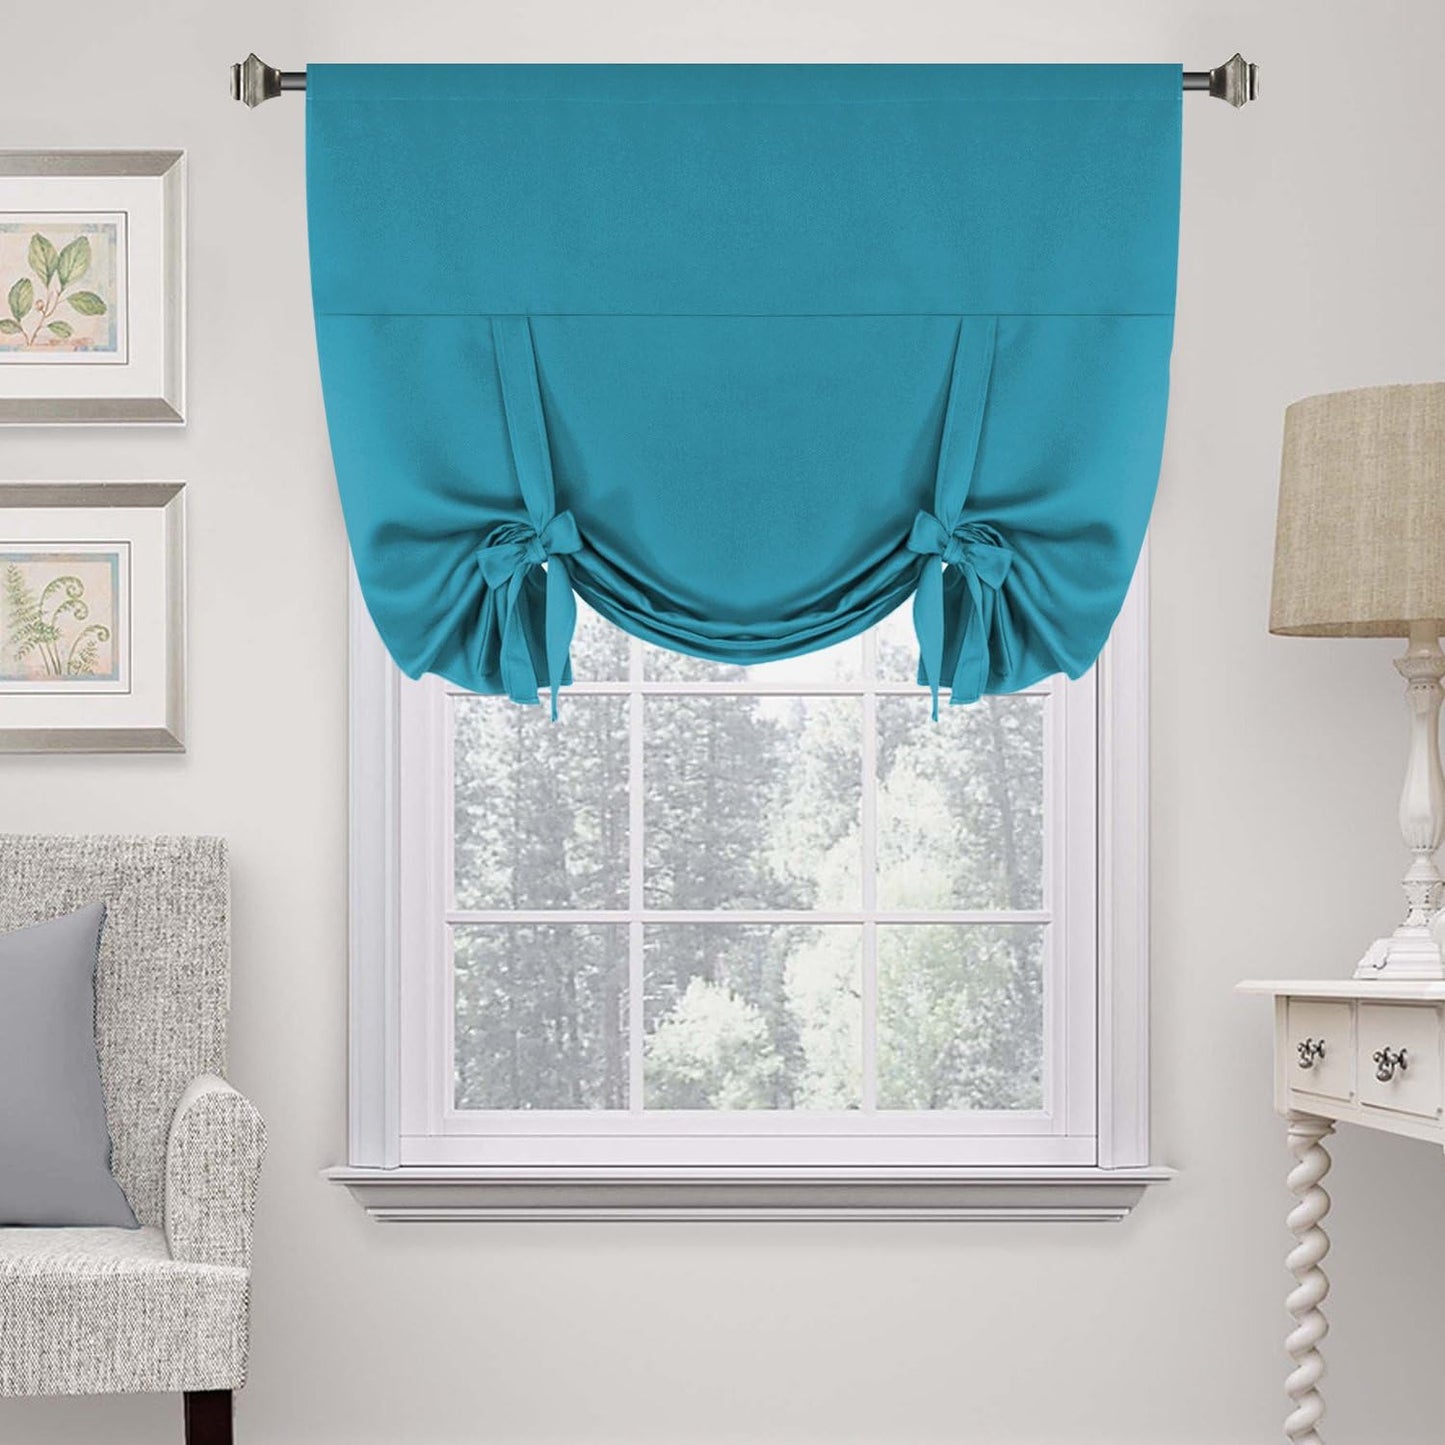 H.VERSAILTEX Tie up Curtain Thermal Insulated Room Darkening Rod Pocket Valance for Bedroom (Coral, 1 Panel, 42 Inches W X 63 Inches L)  H.VERSAILTEX Turquoise Blue W42" X L63" 1-Pack 